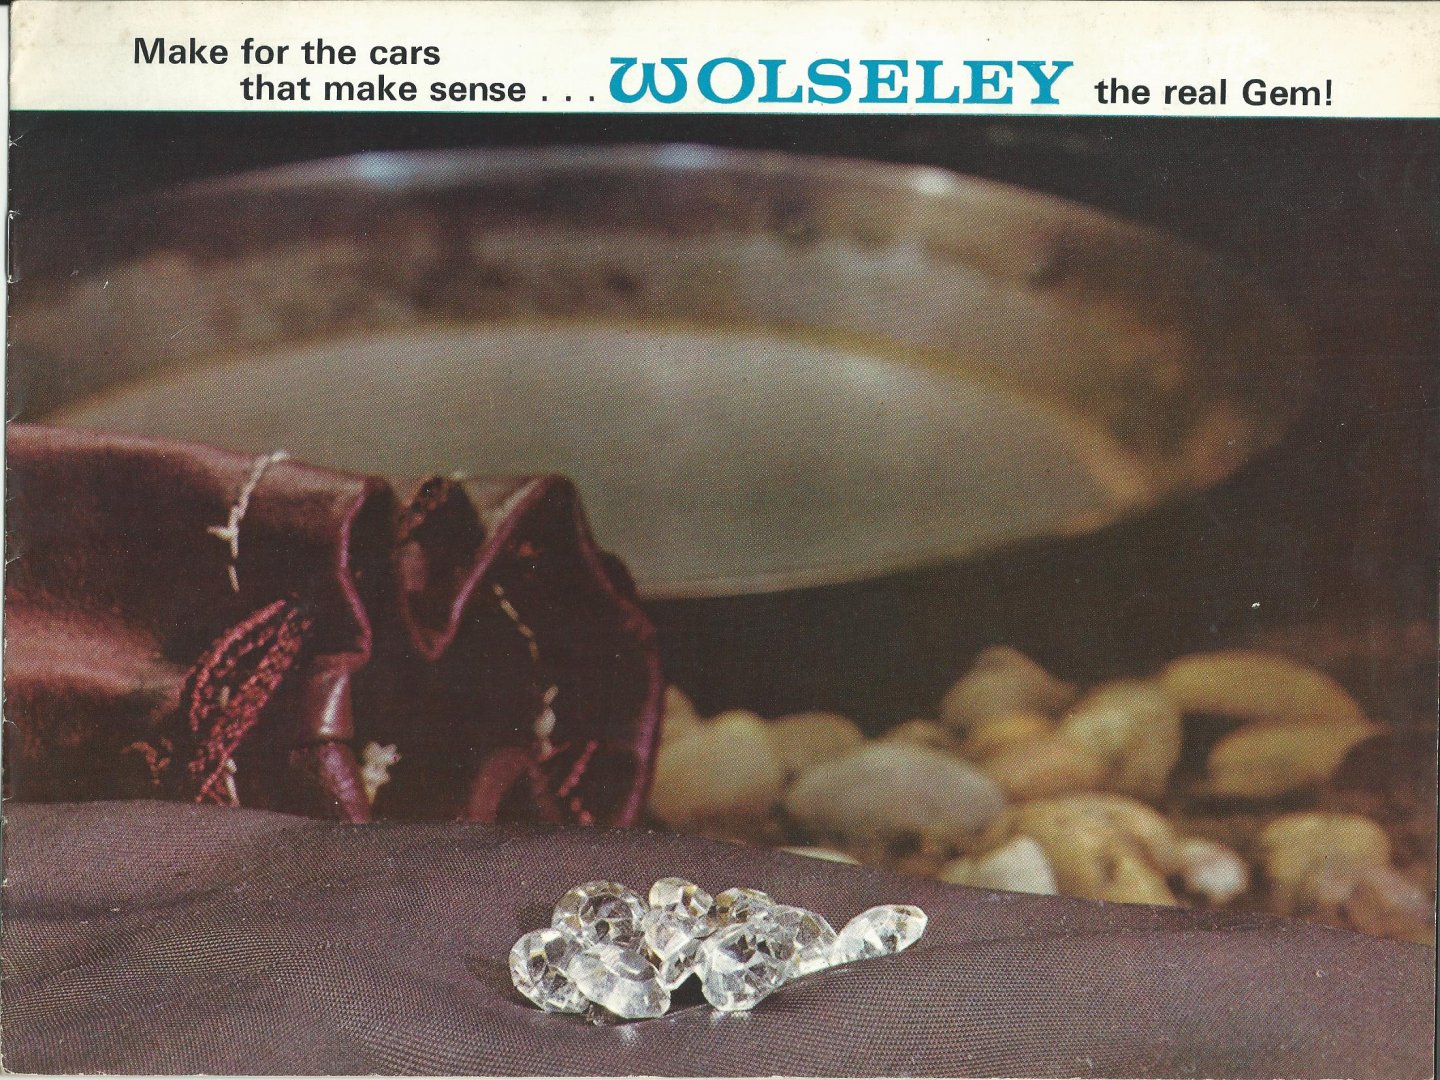 Anoniem - Make for the cars that make sense ... Wolseley, the real gem